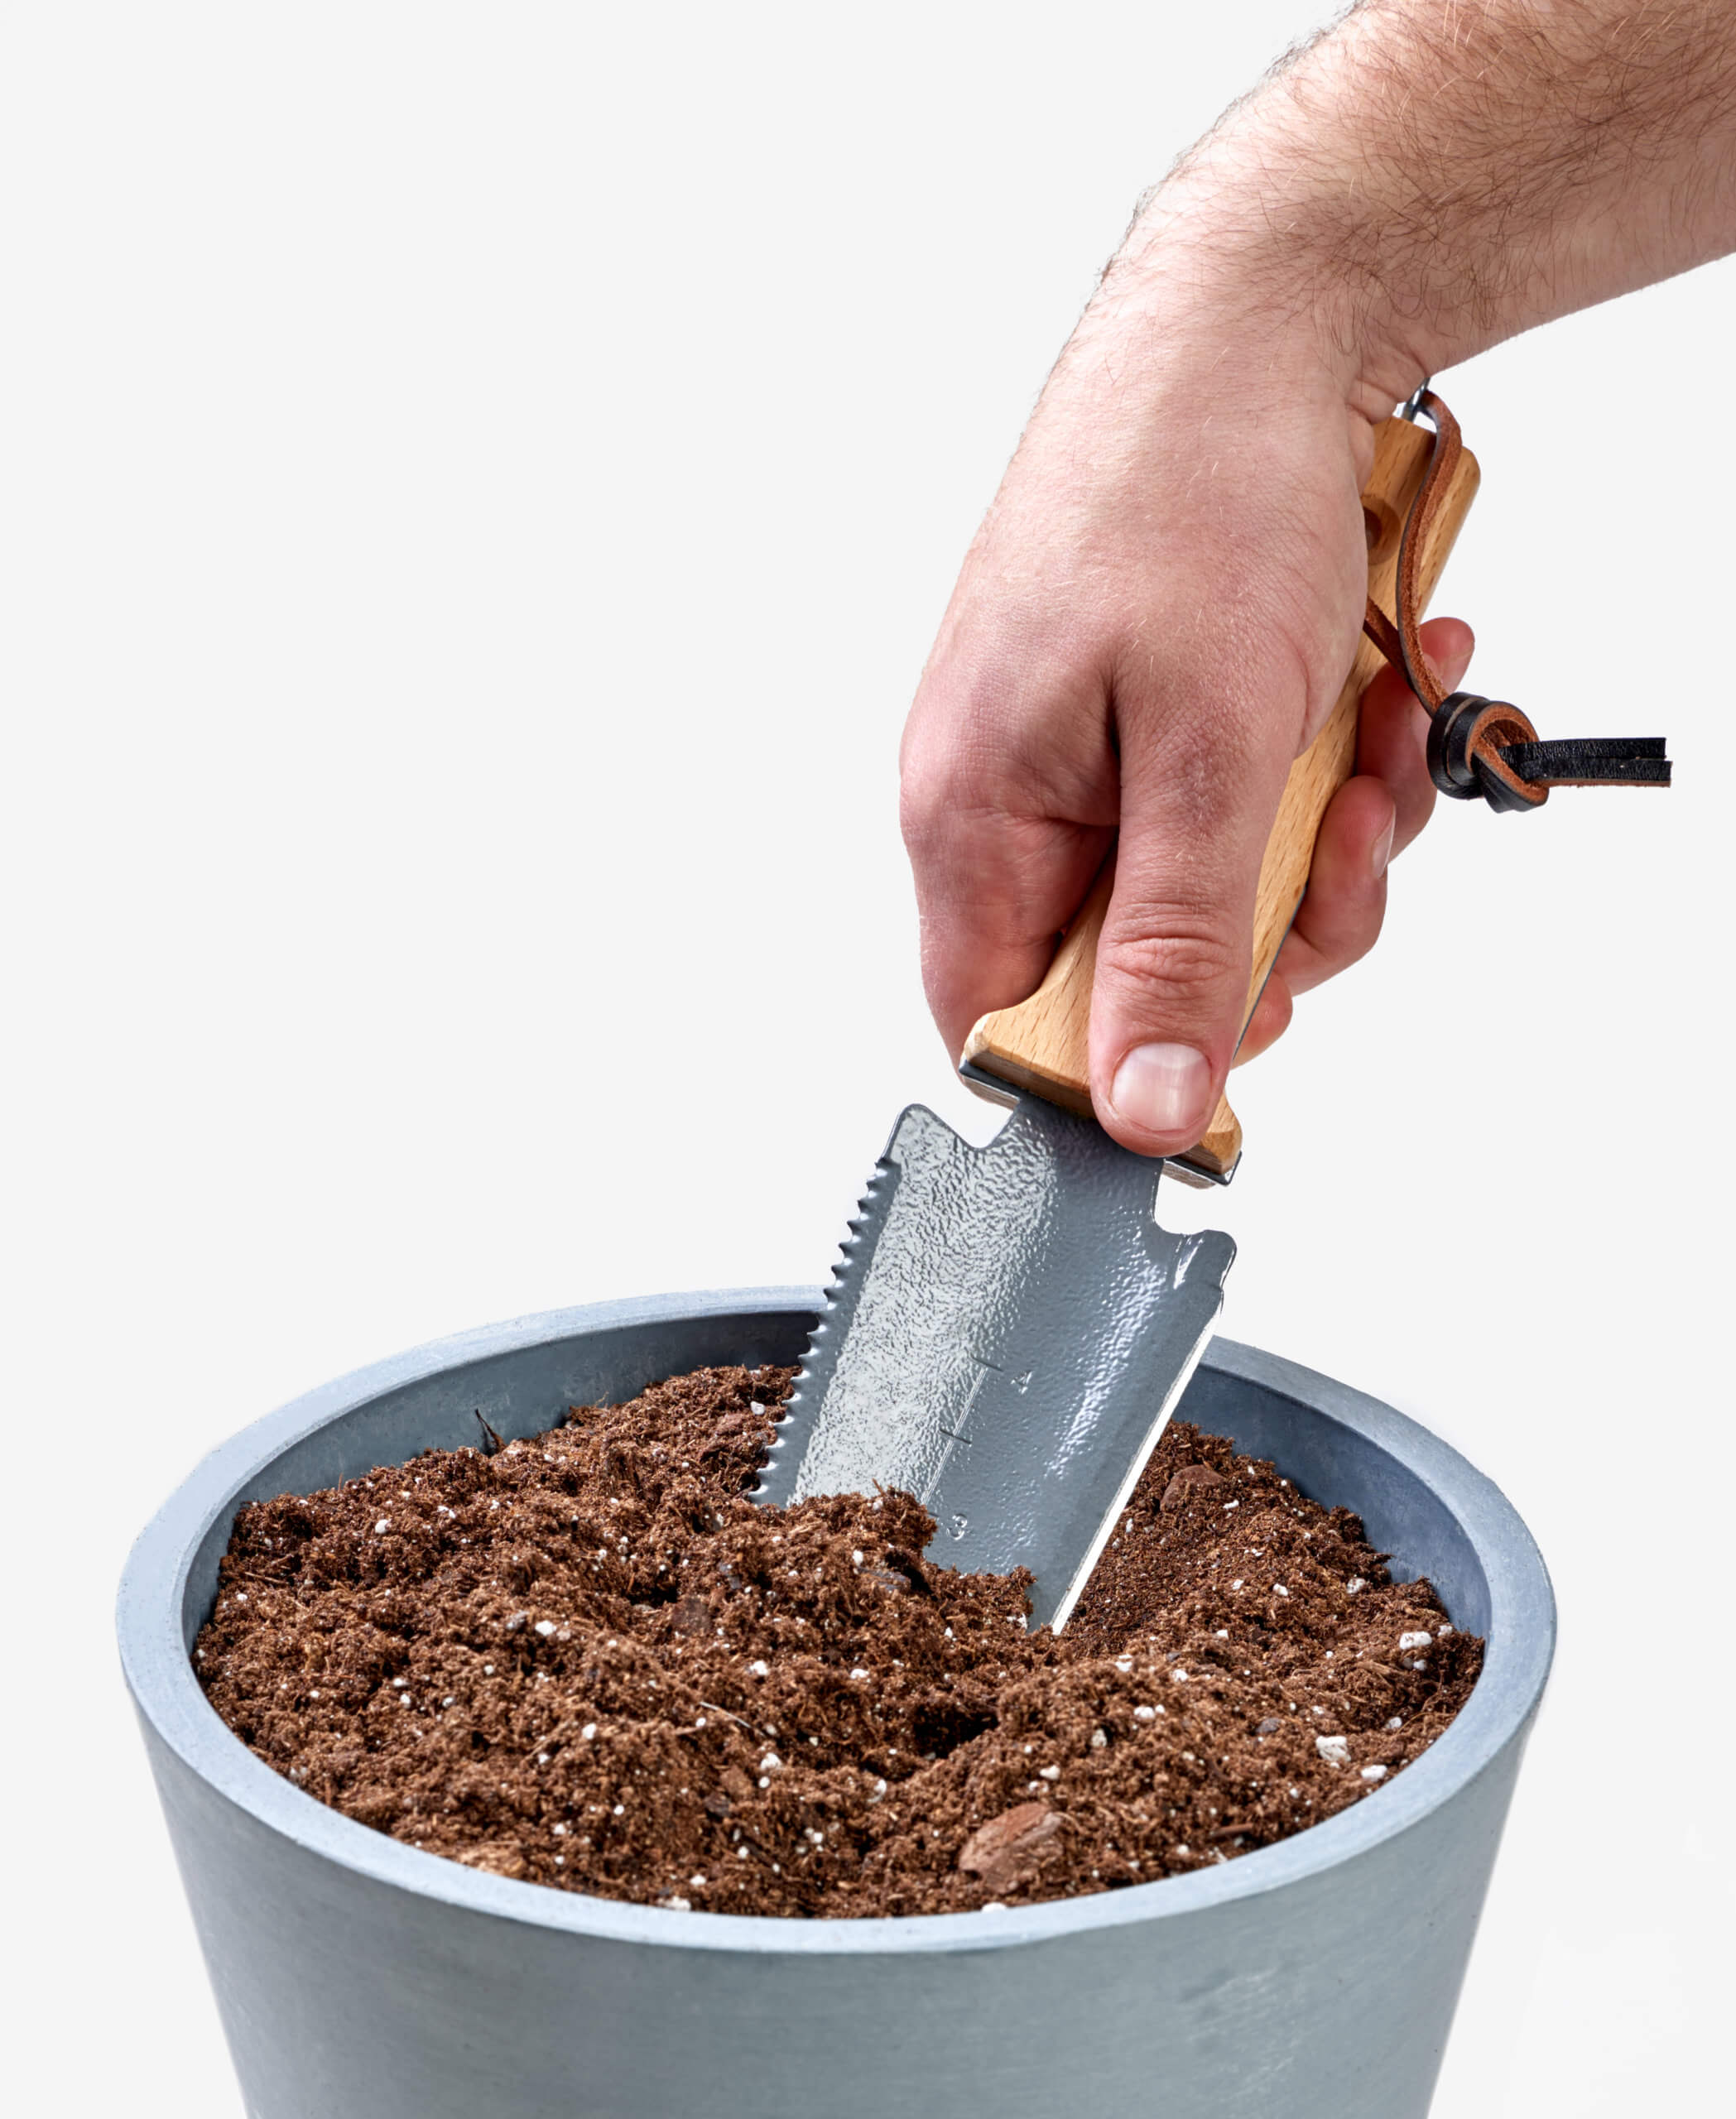 https://bloomscape.com/wp-content/uploads/2020/07/bloomscape_product_soil-knife_action-scaled.jpg?ver=239475